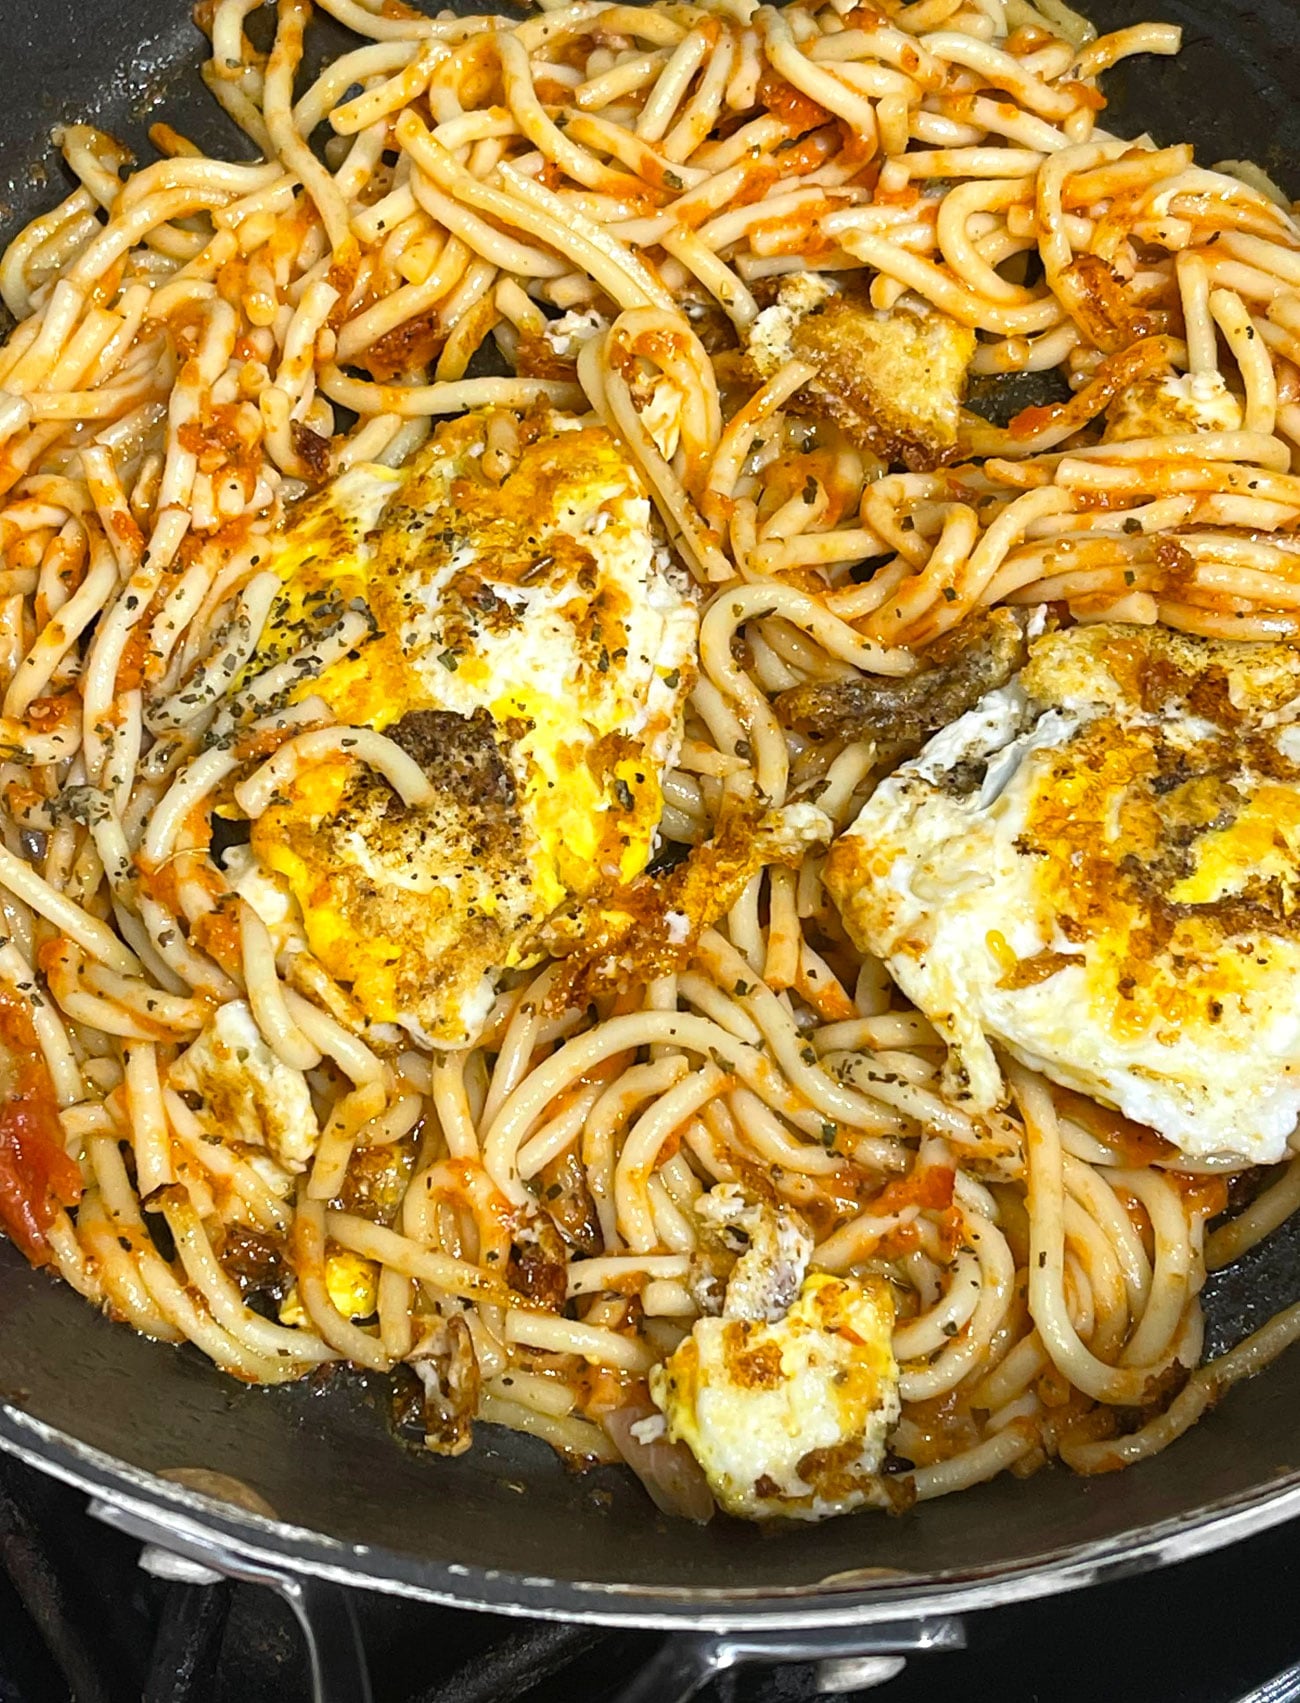 fried spaghetti noodles with fried eggs